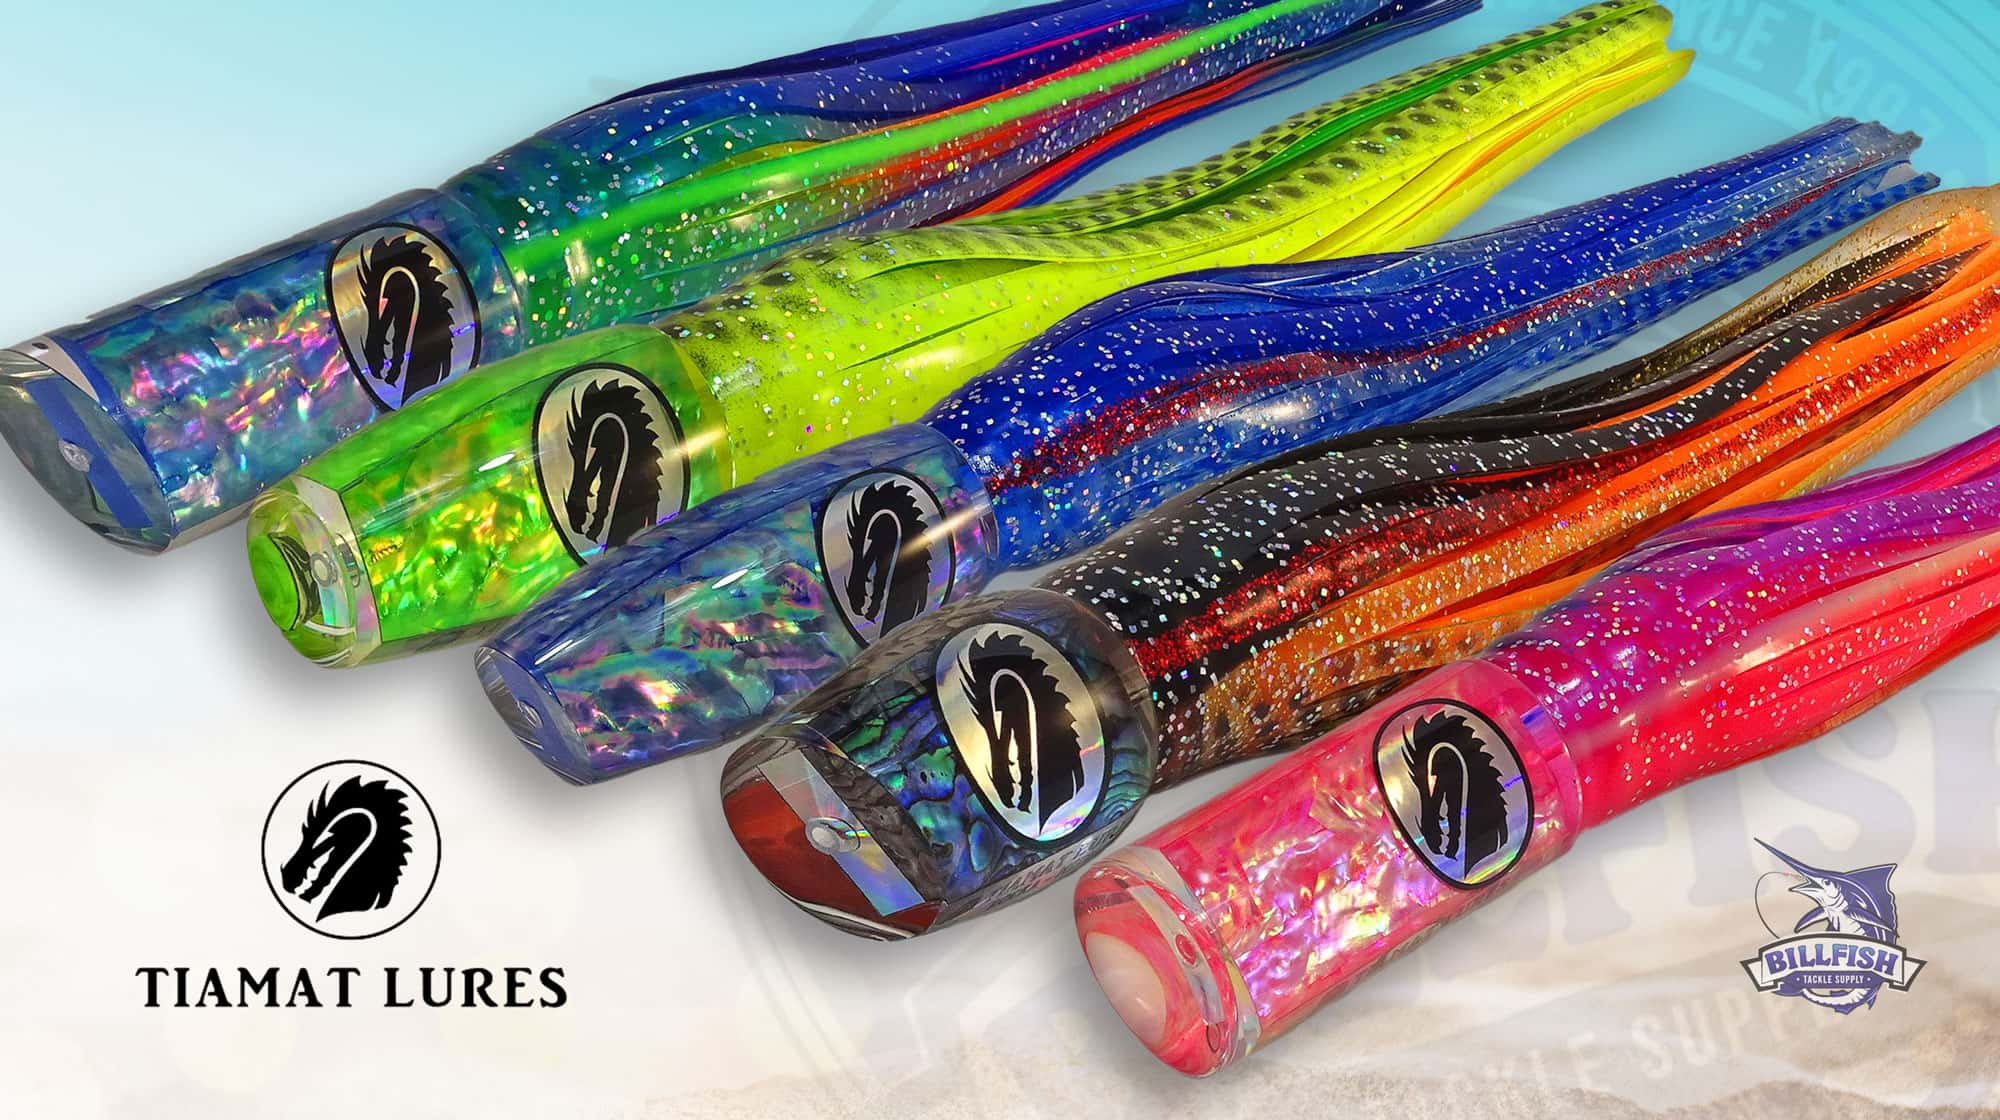 Best trolling lures for Marlin - Tiamat Lures